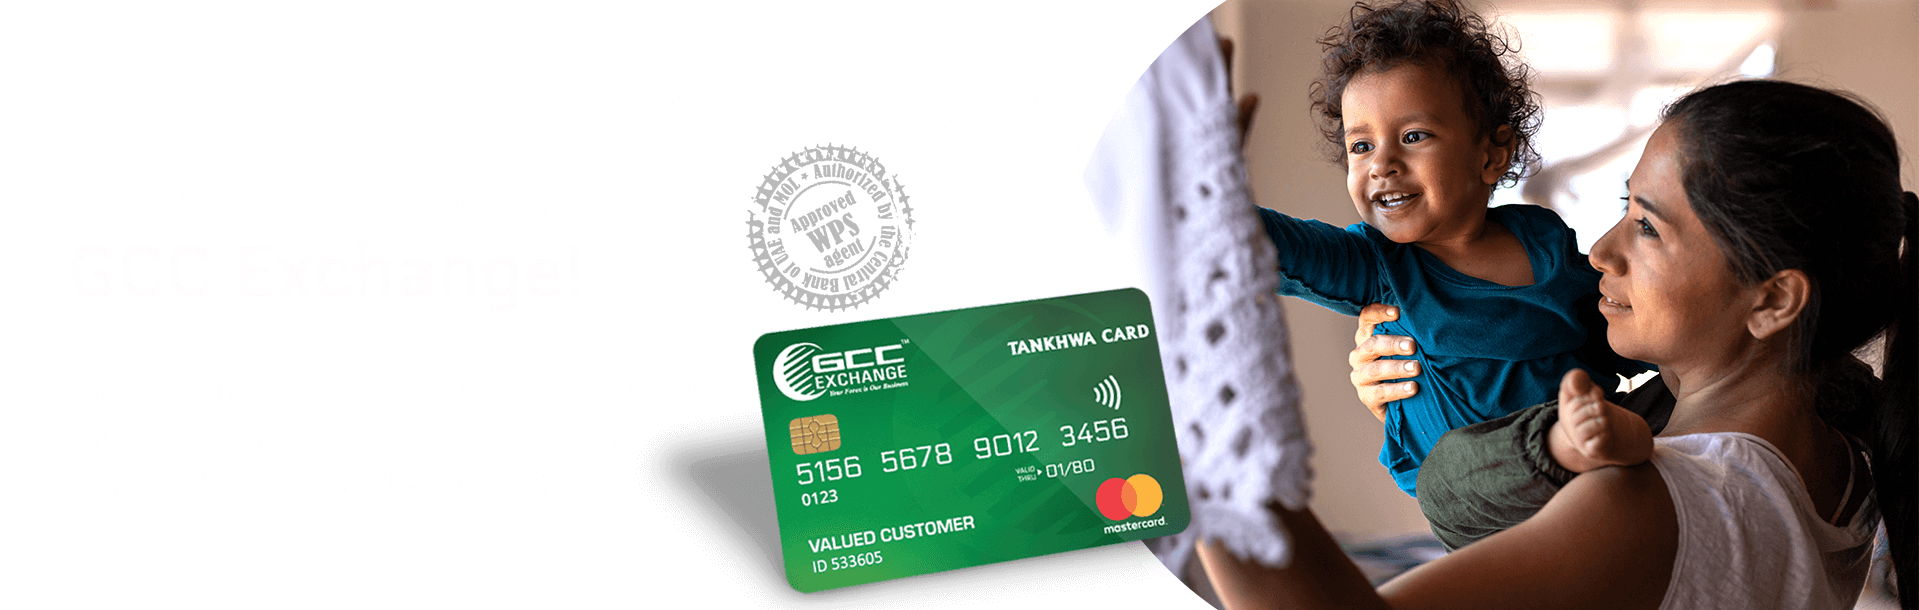 Now Pay Your Domestic Workers’ Salaries Through GCC Exchange!